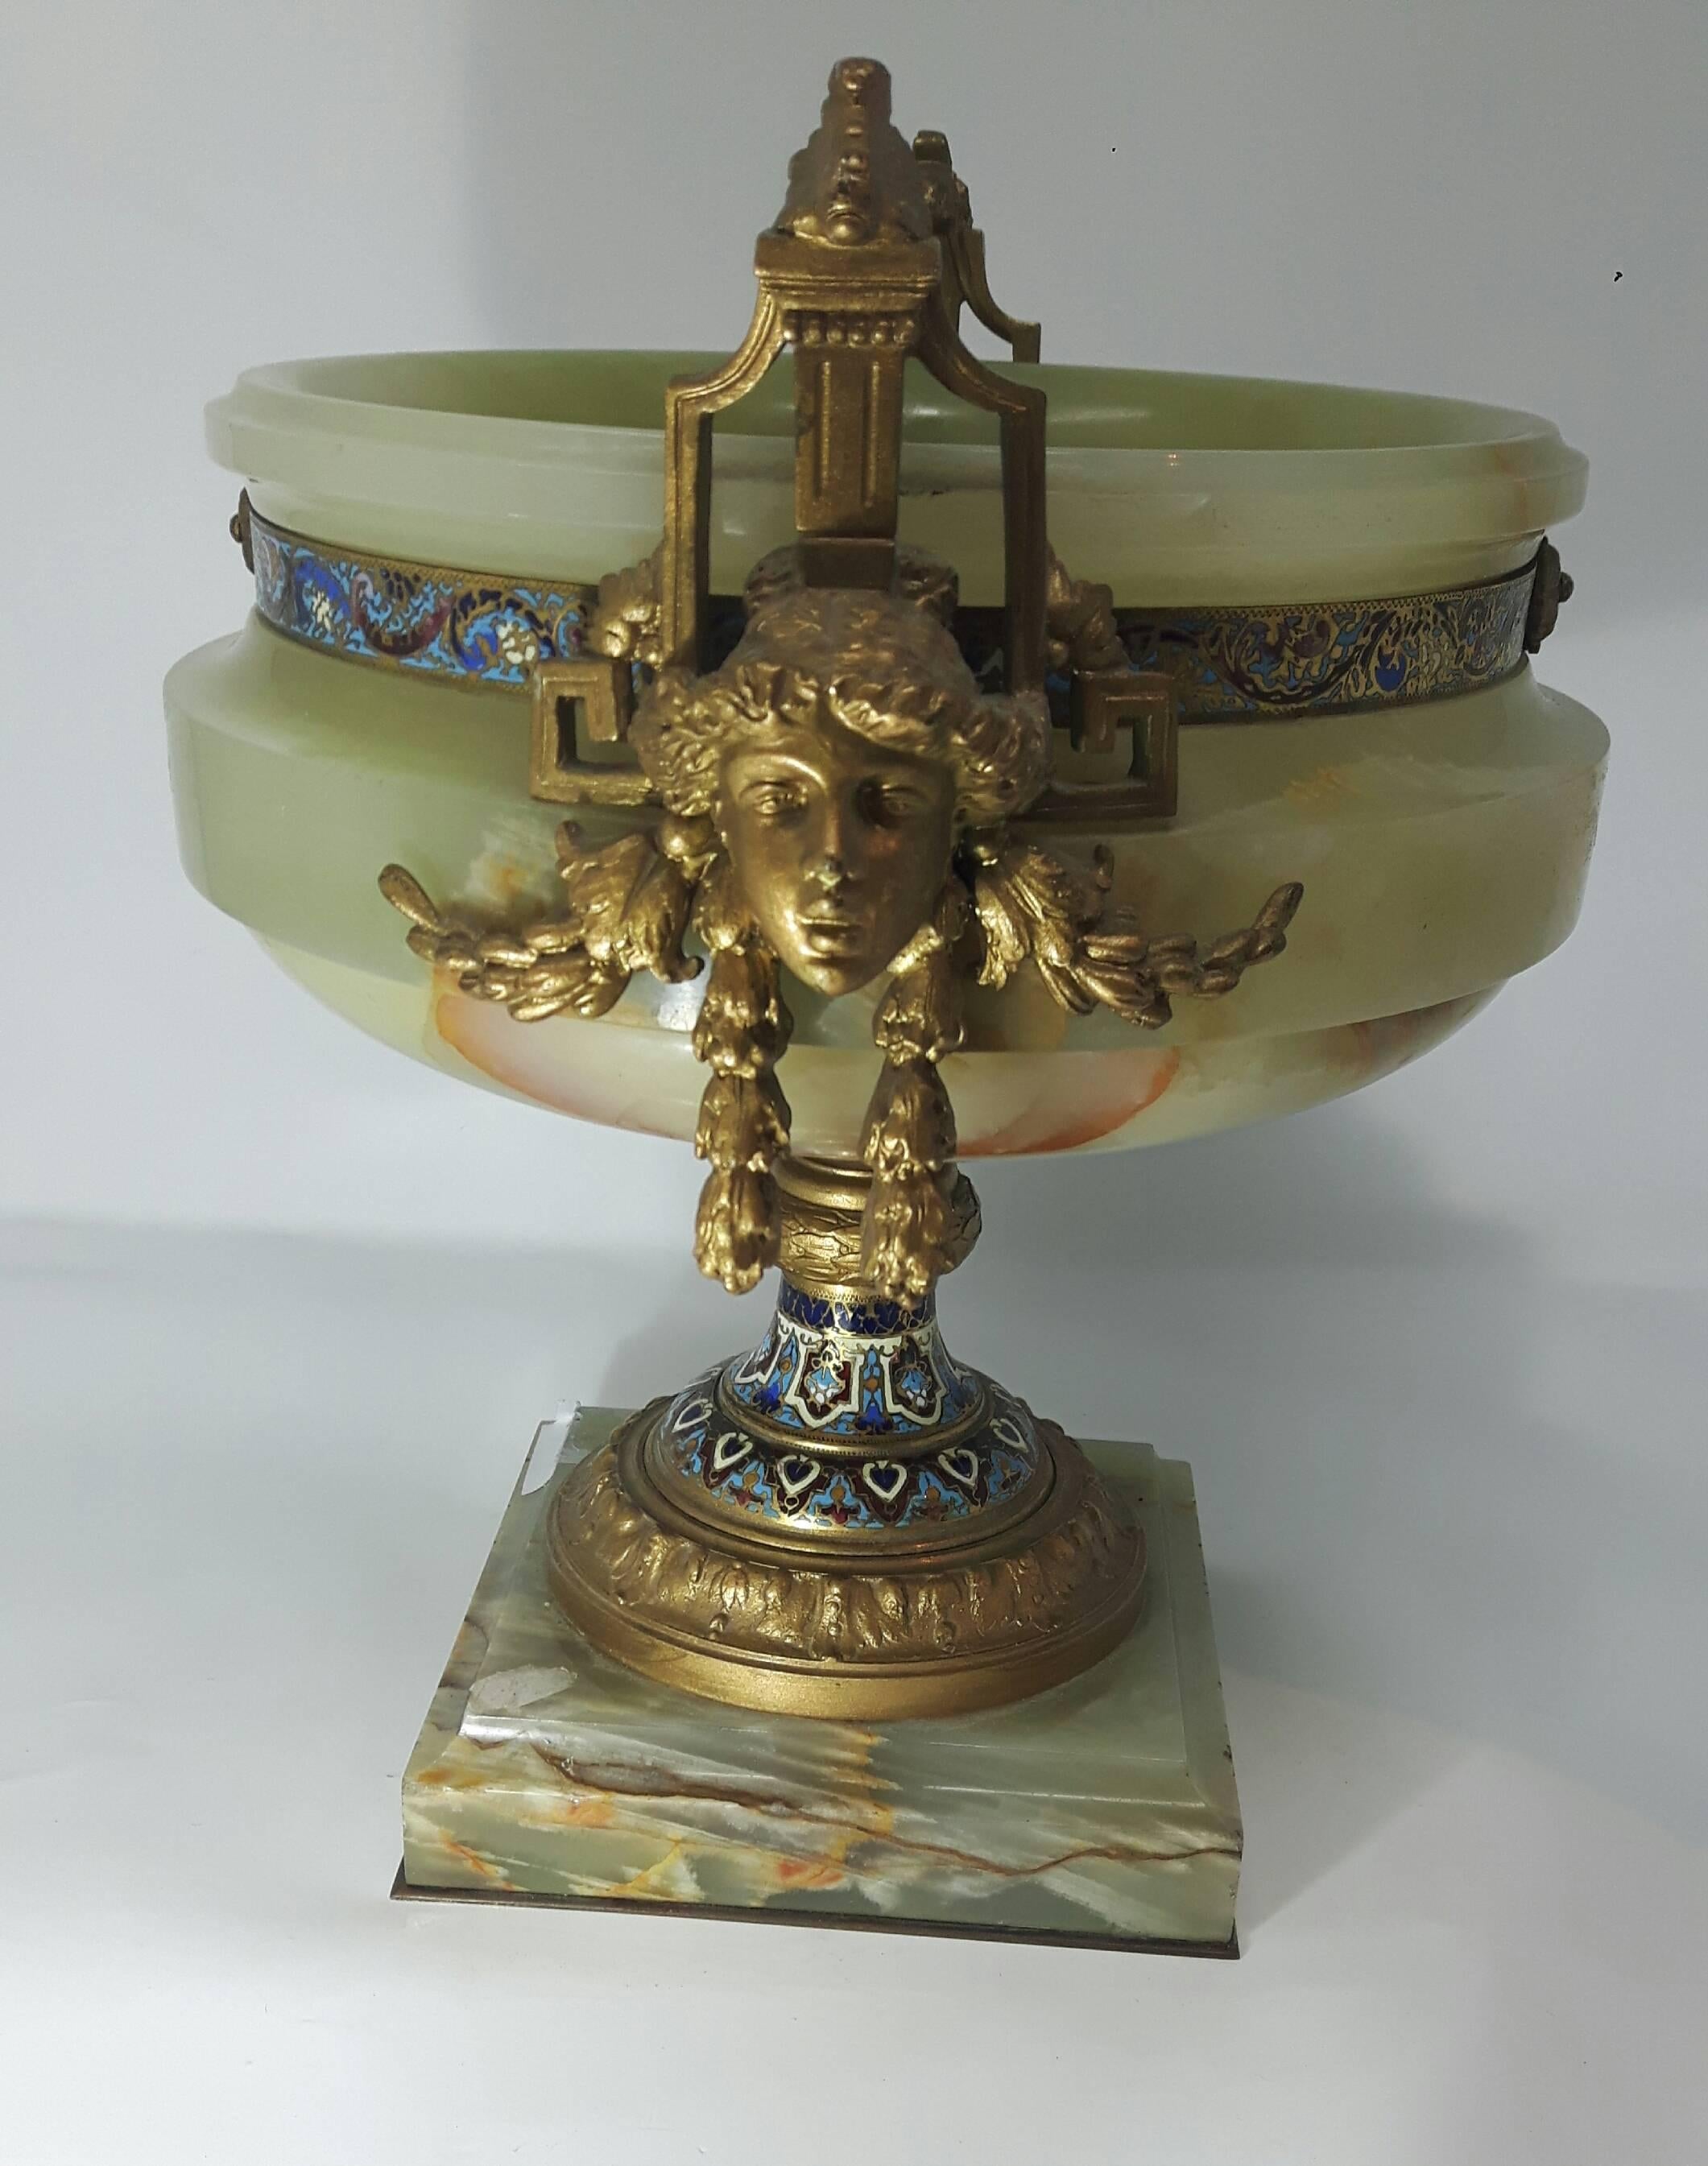 A fine quality 19th century gilt bronze and champleve enamel and alabaster centrepiece.